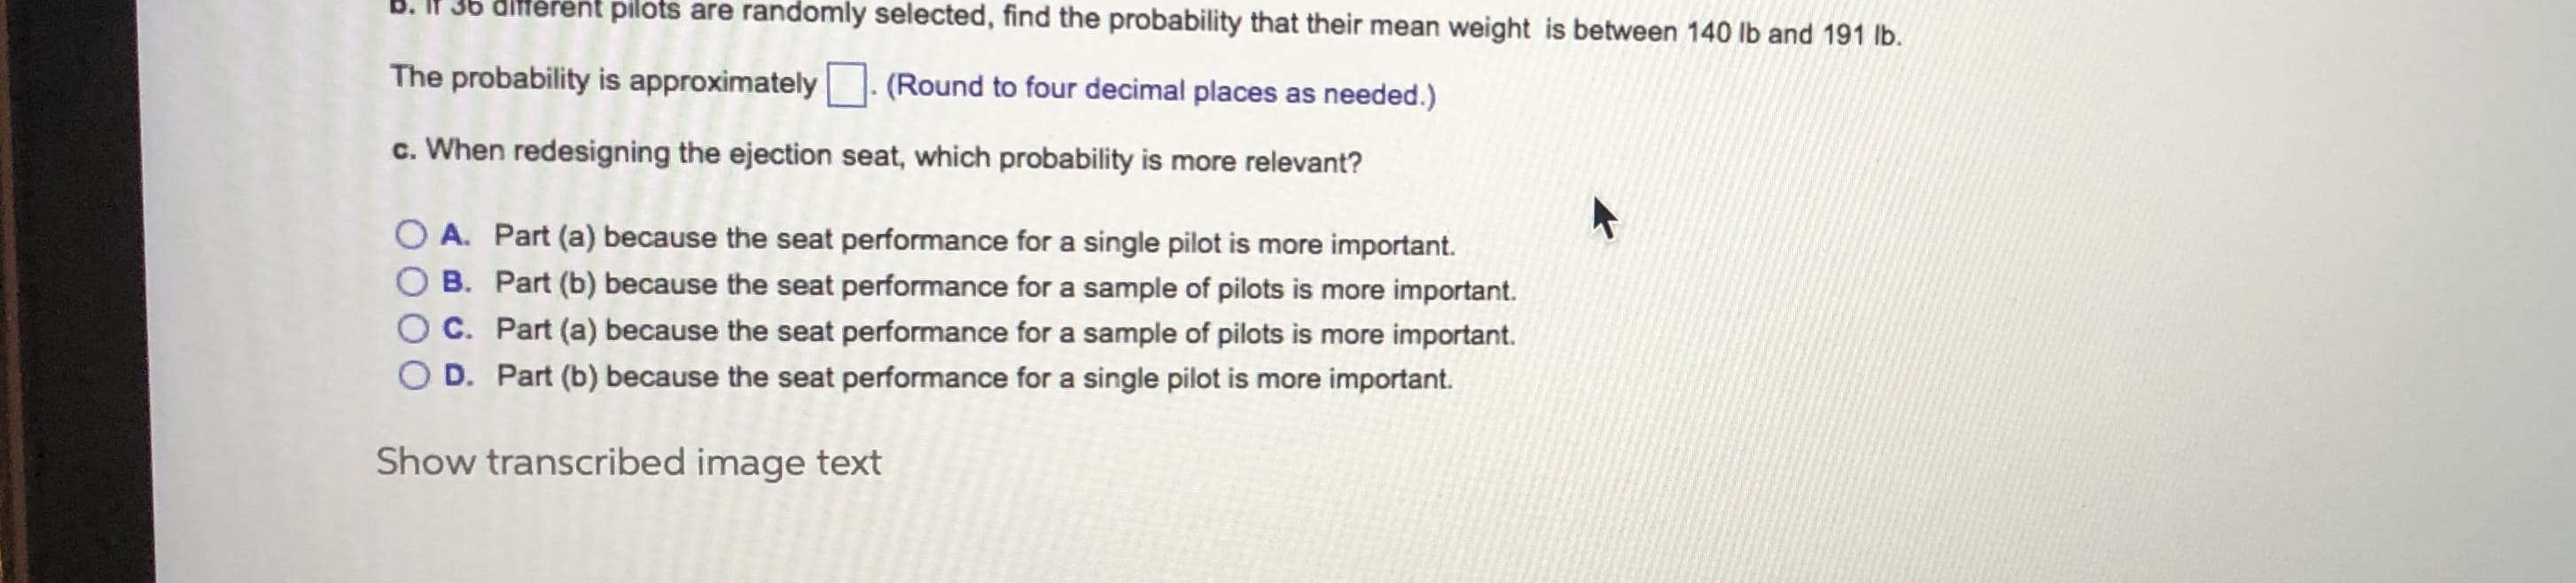 30 dliferent pilots are randomly selected, find the probability that their mean weight is between 140 lb and 191 lb.
The probability is approximately
(Round to four decimal places as needed.)
c. When redesigning the ejection seat, which probability is more relevant?
O A. Part (a) because the seat performance for a single pilot is more important.
O B. Part (b) because the seat performance for a sample of pilots is more important.
OC. Part (a) because the seat performance for a sample of pilots is more important.
O D. Part (b) because the seat performance for a single pilot is more important.
Show transcribed image text
